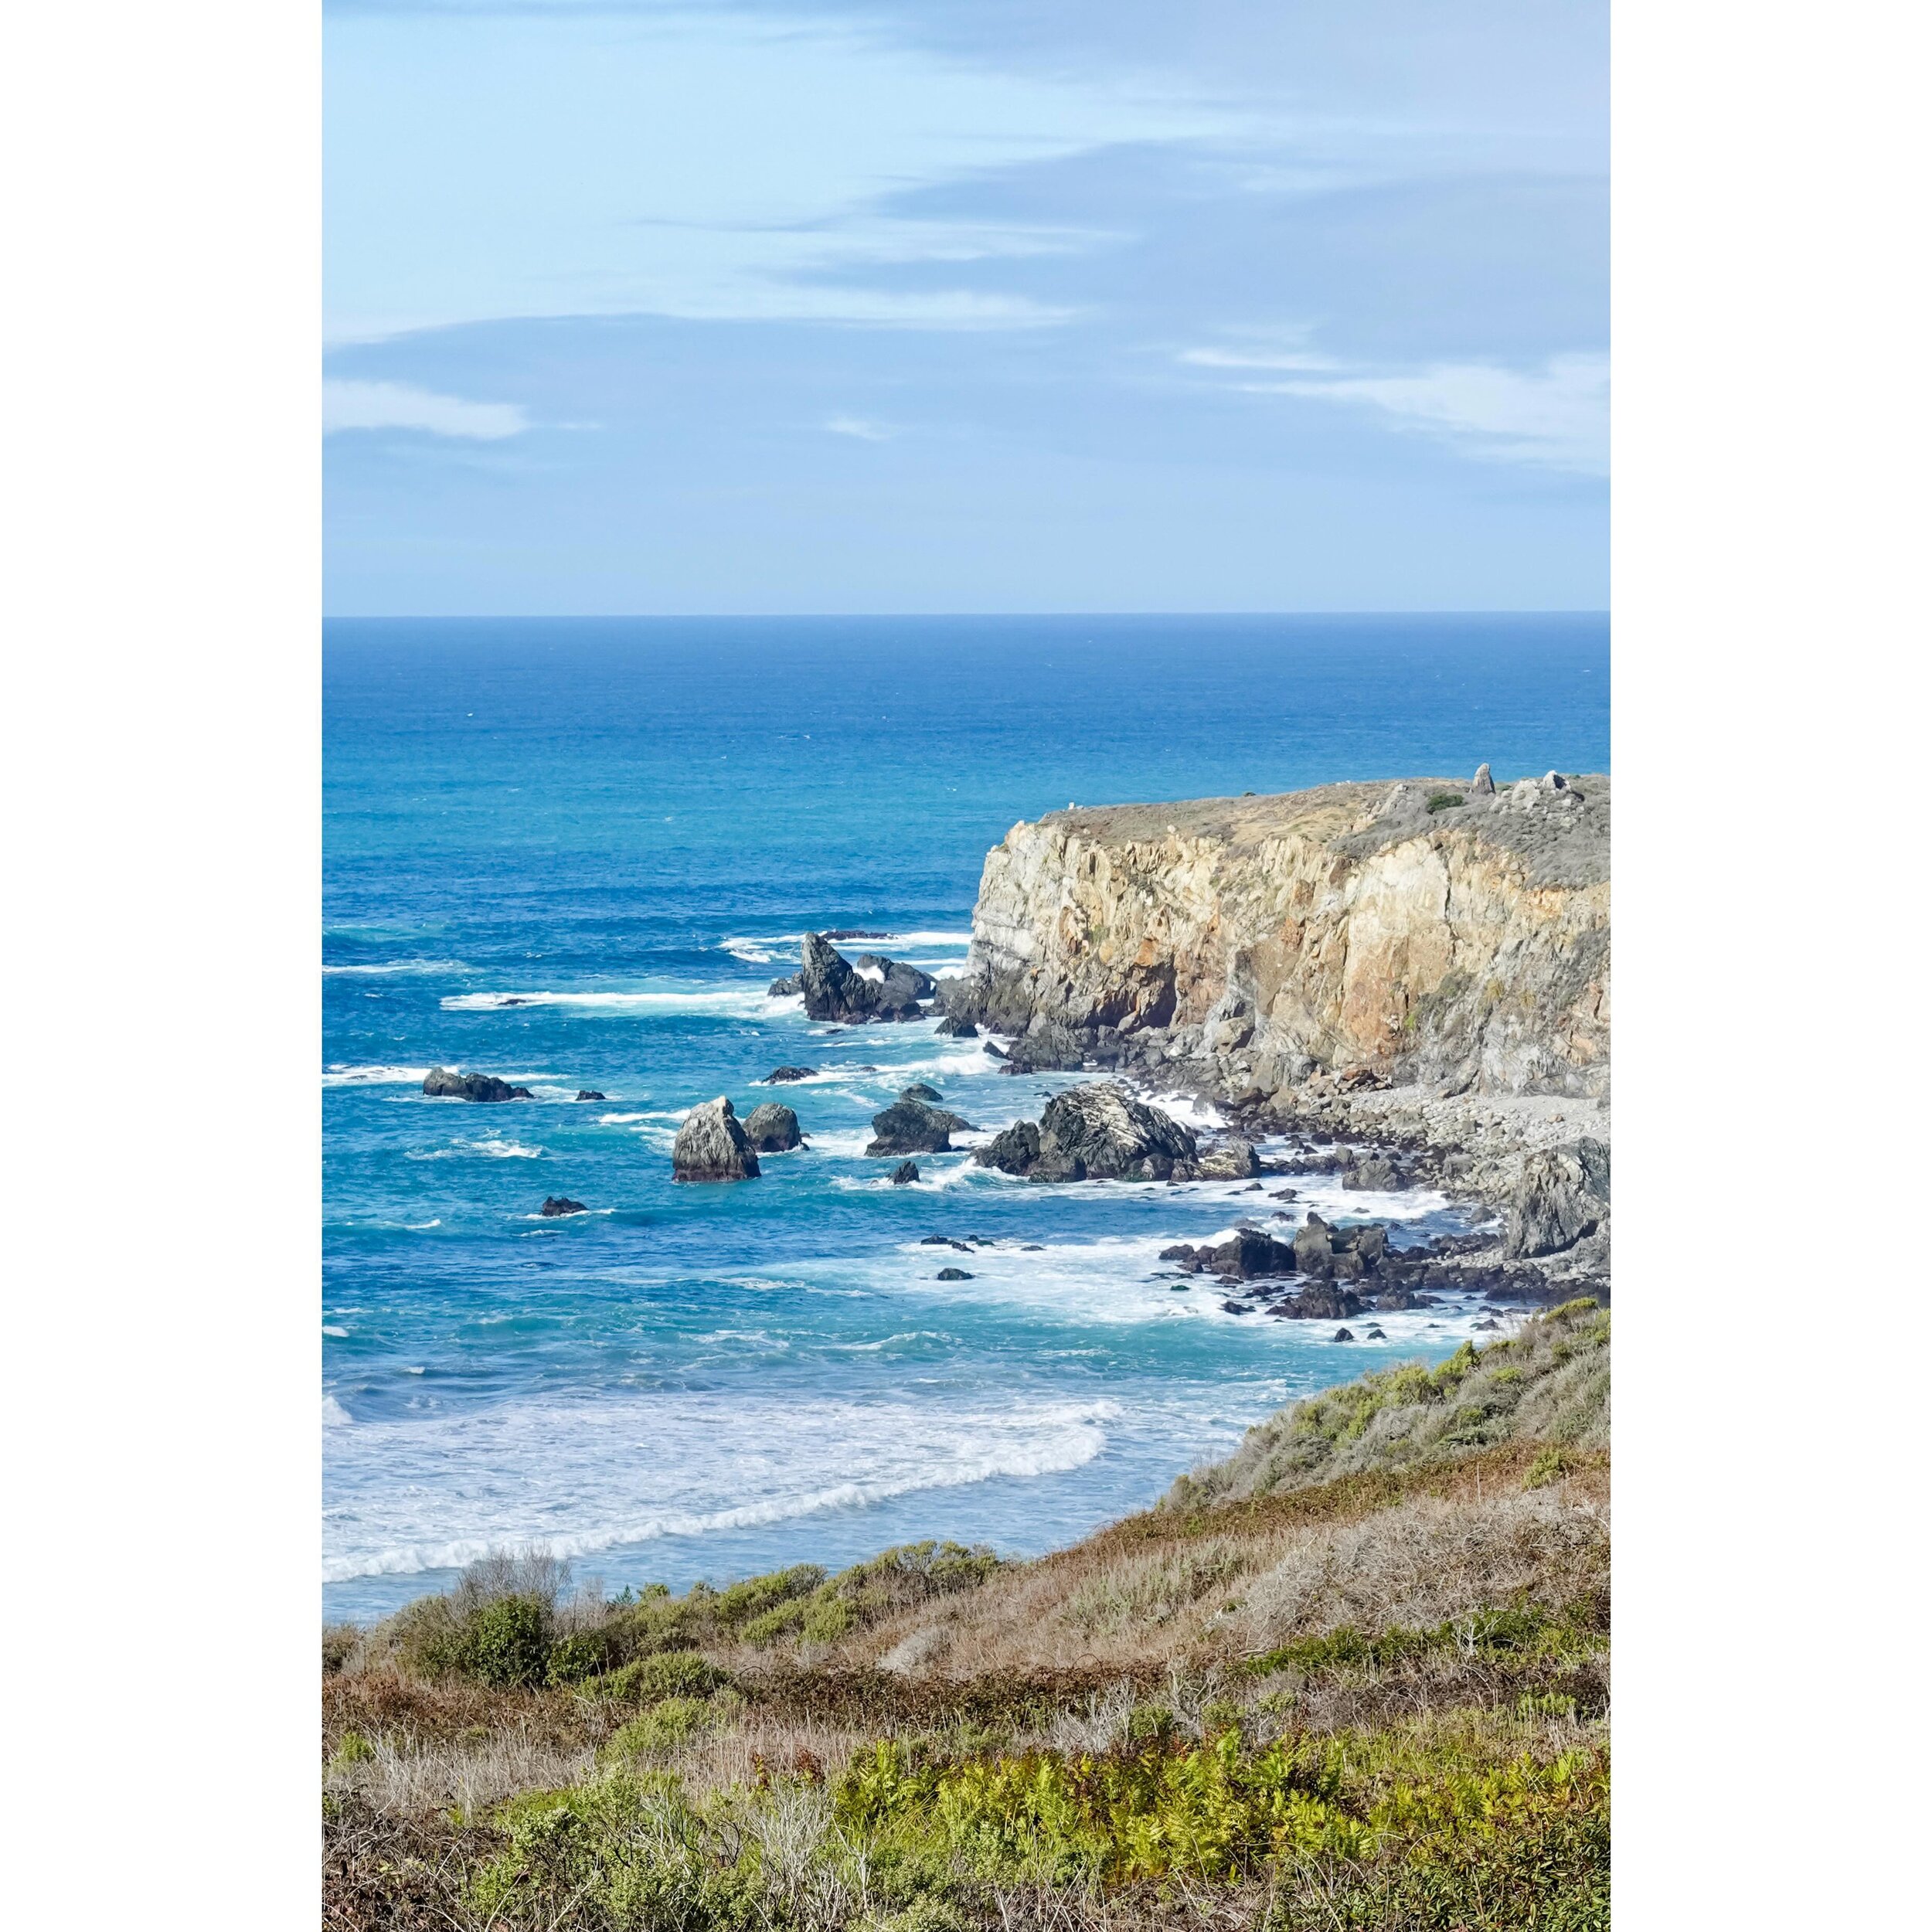 📍 Big Sur, CA USA 
Highway 1 - Take your sweet time and make spontaneous stops along the way to take a hike and snap a few photos.
.
.
.
.
.
#bucketlist #roadtrip #bigsur #california #adventure #roadtrippingusa #travel #vacation #nature #oceanview #